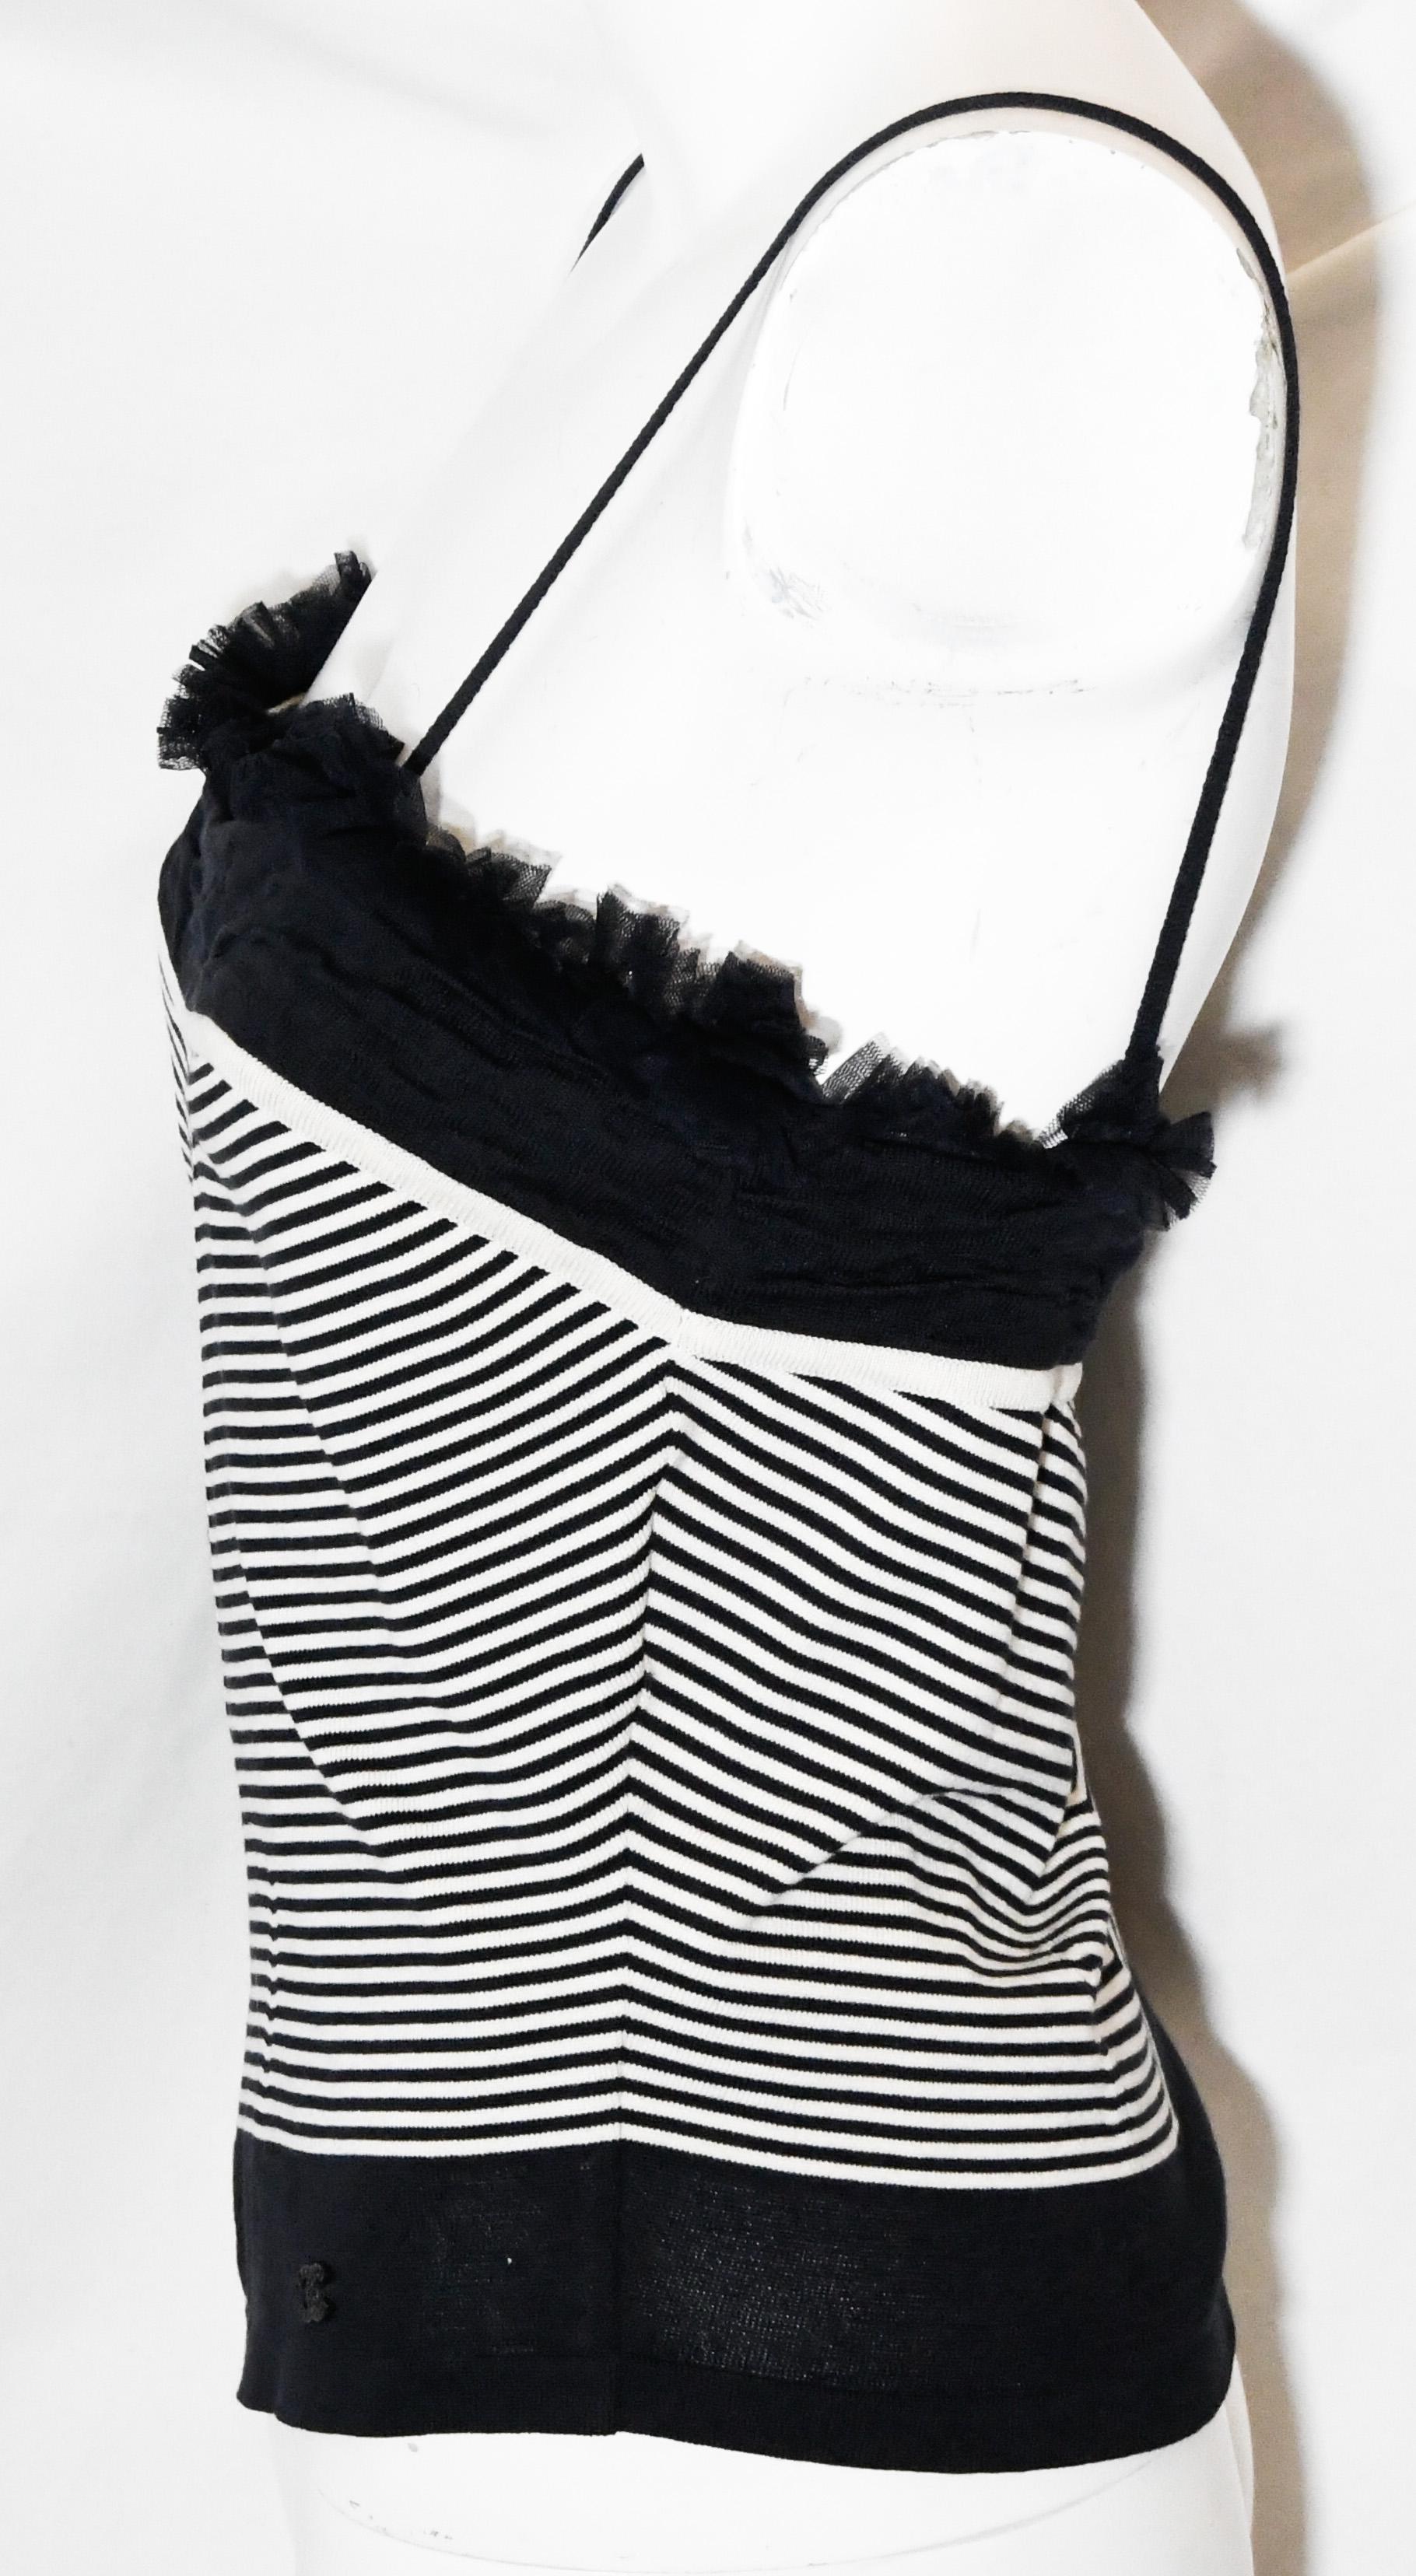 Chanel black and white camisole decorated with a black gathered tulle ruffles around the bustline.   This knit camisole's stripes came together at the front in a chevron design.  This camisole is casual and can be worn for day or night, with or